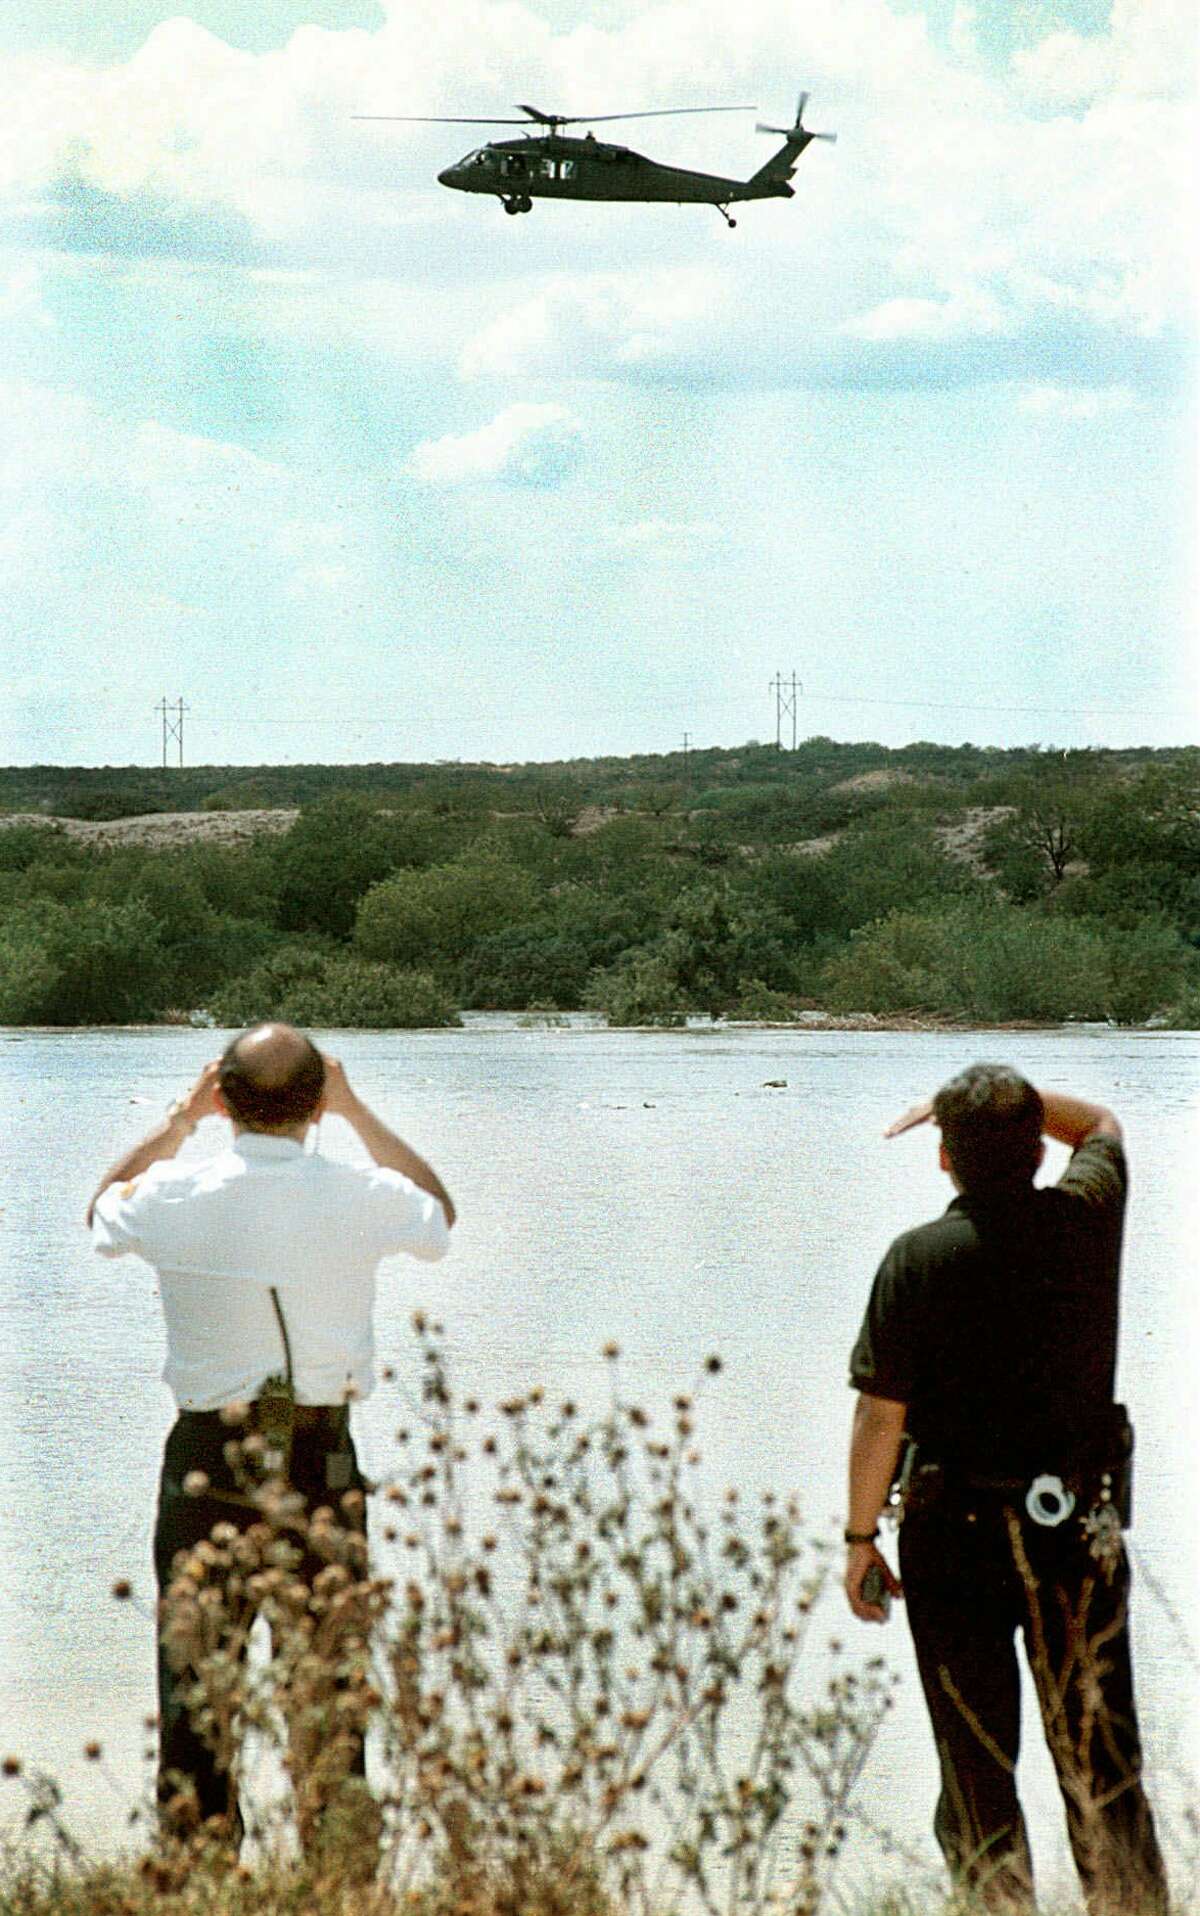 Laredo, Texas fire and police officials watch from the banks of the flooded Rio Grande as a National Guard helicopter searches for an individual reported floating along the rising river, Wednesday, Aug. 26, 1998. Local rescue teams have been dispatched throughout the day to the river to search for the reported drowning victims. The rescue teams so far have been unsucessful in finding any victims.